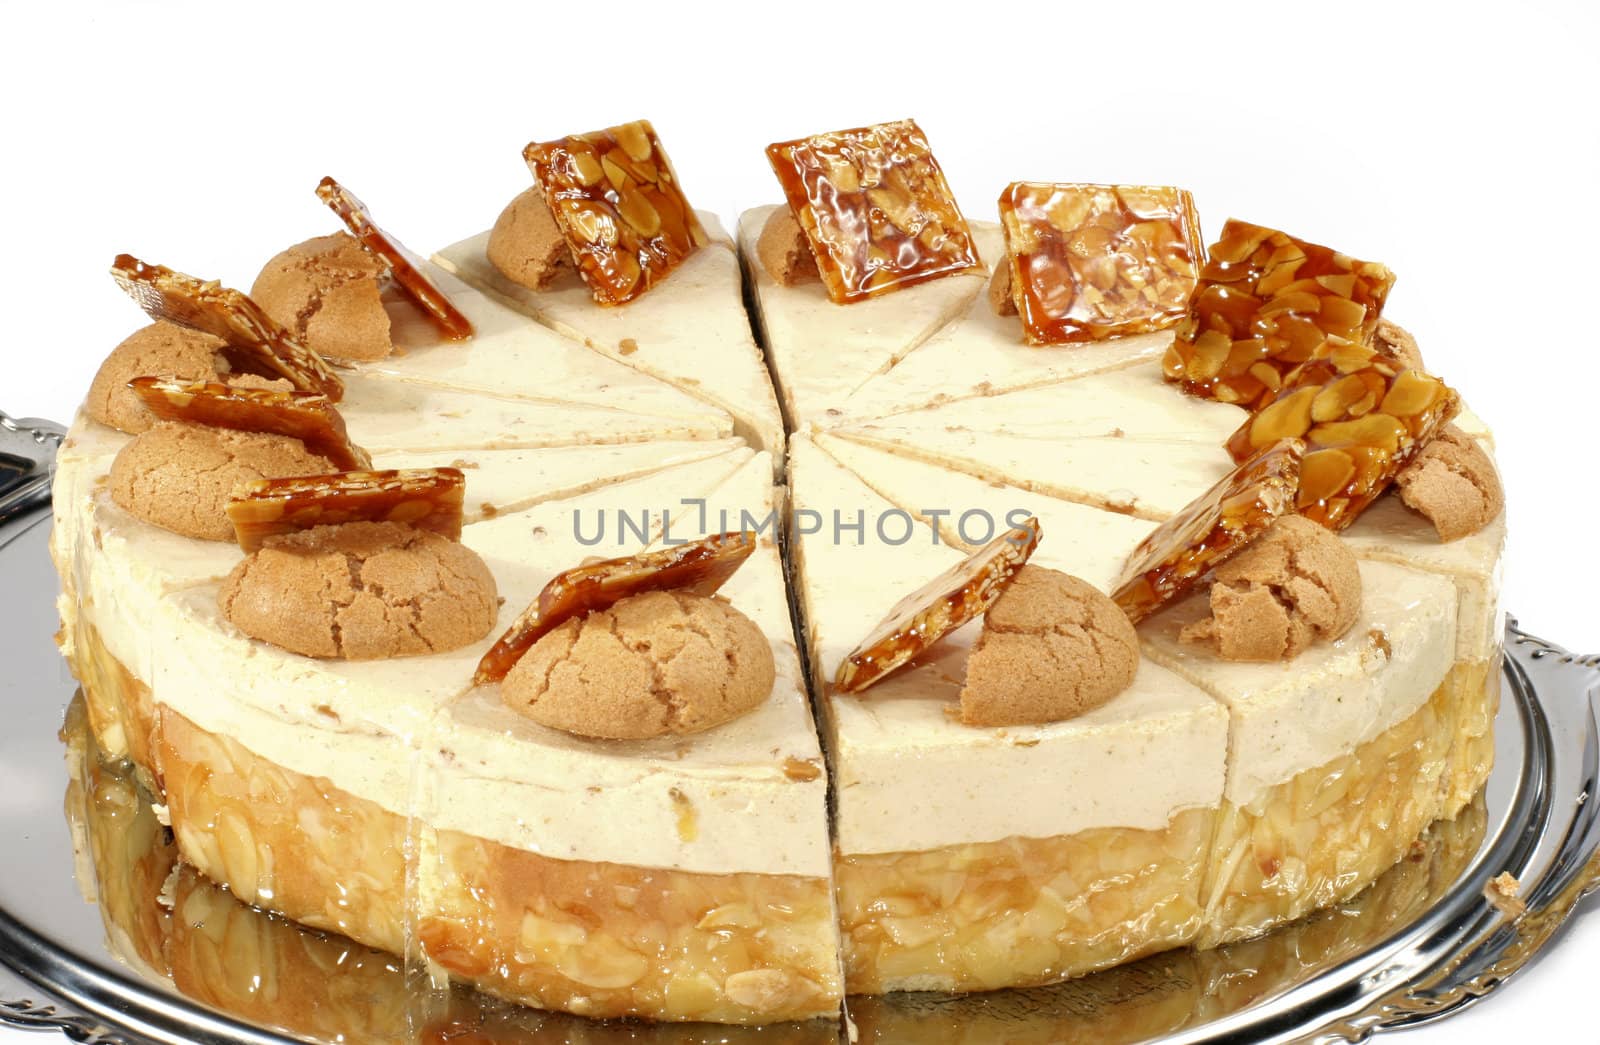 Nut cake with cream stuffing and peanuts in caramels